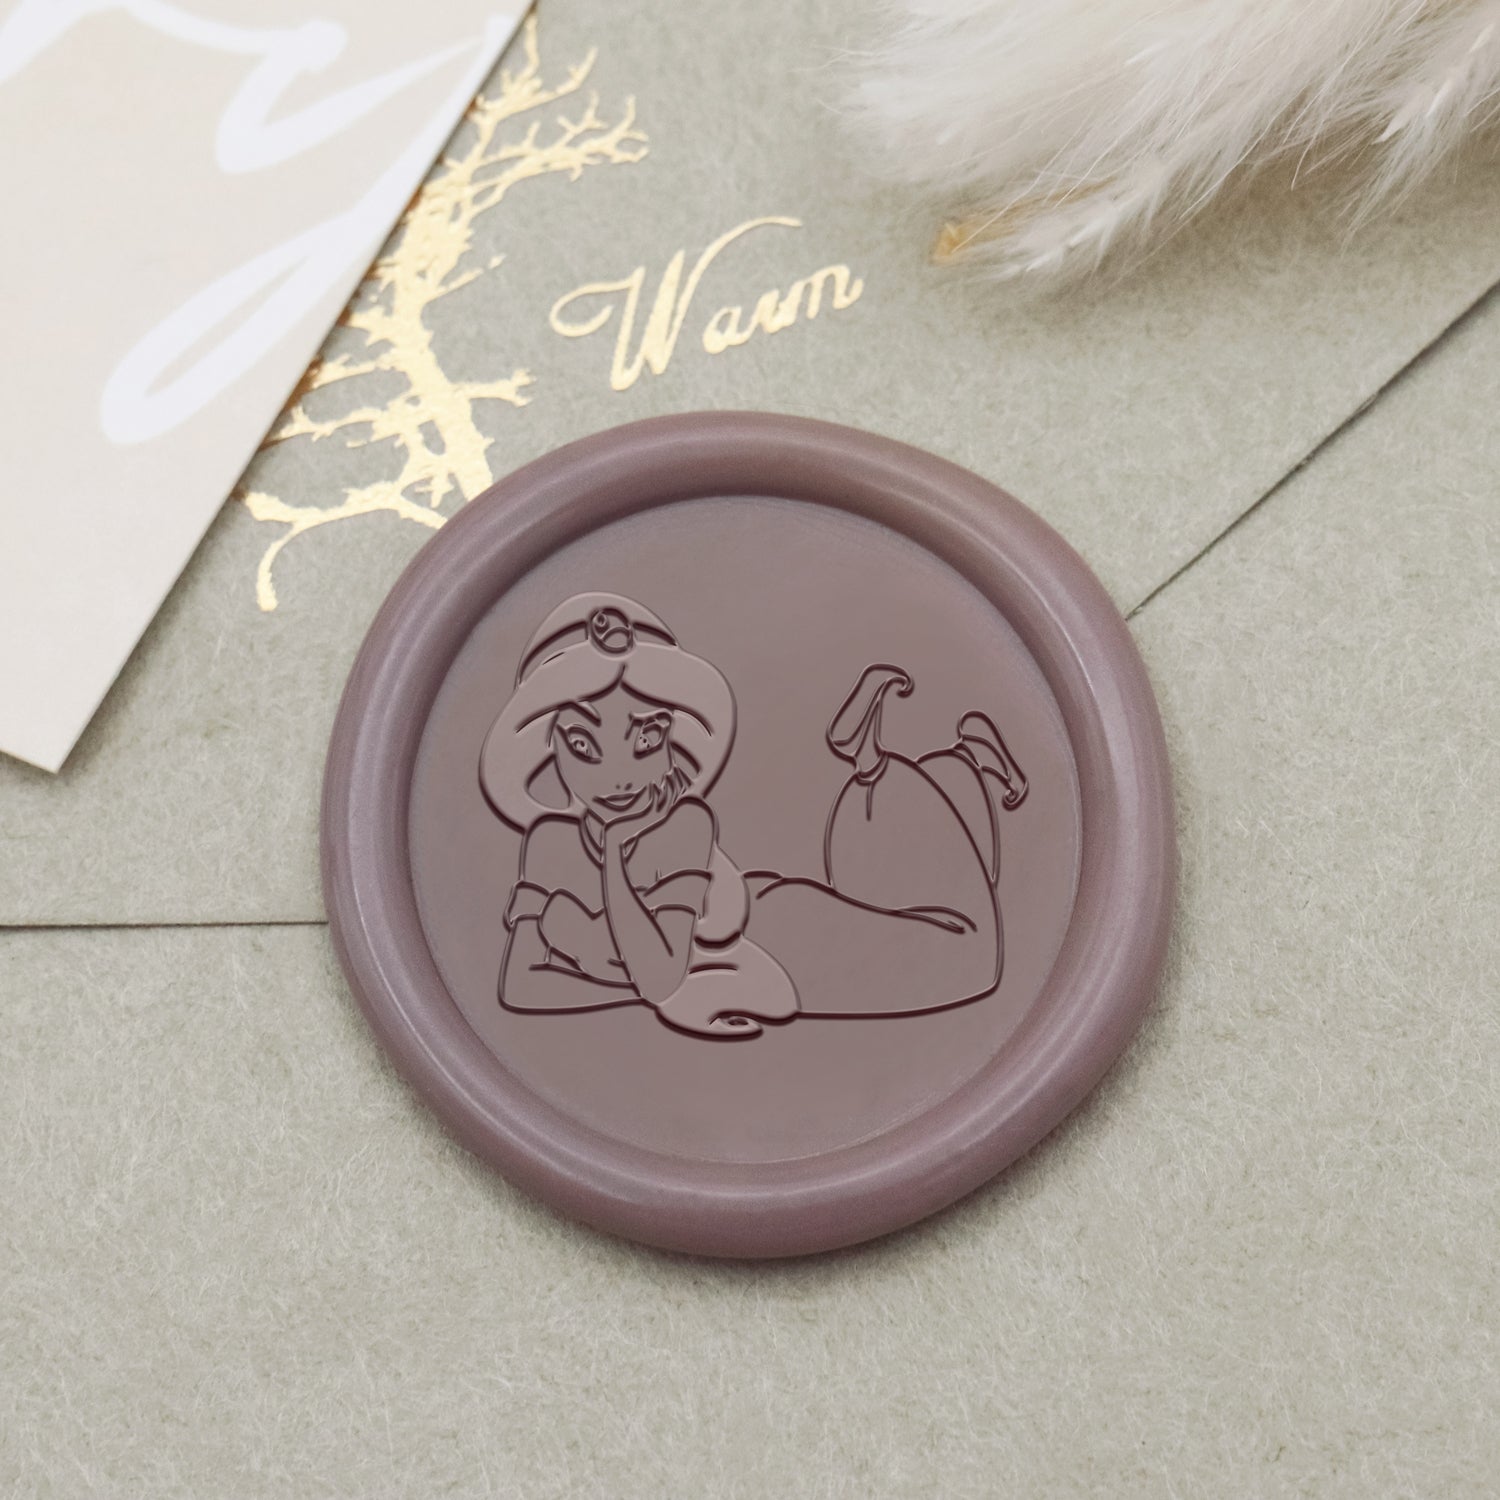 Animated Film Fairytale Character Wax Seal Stamp - 8 1